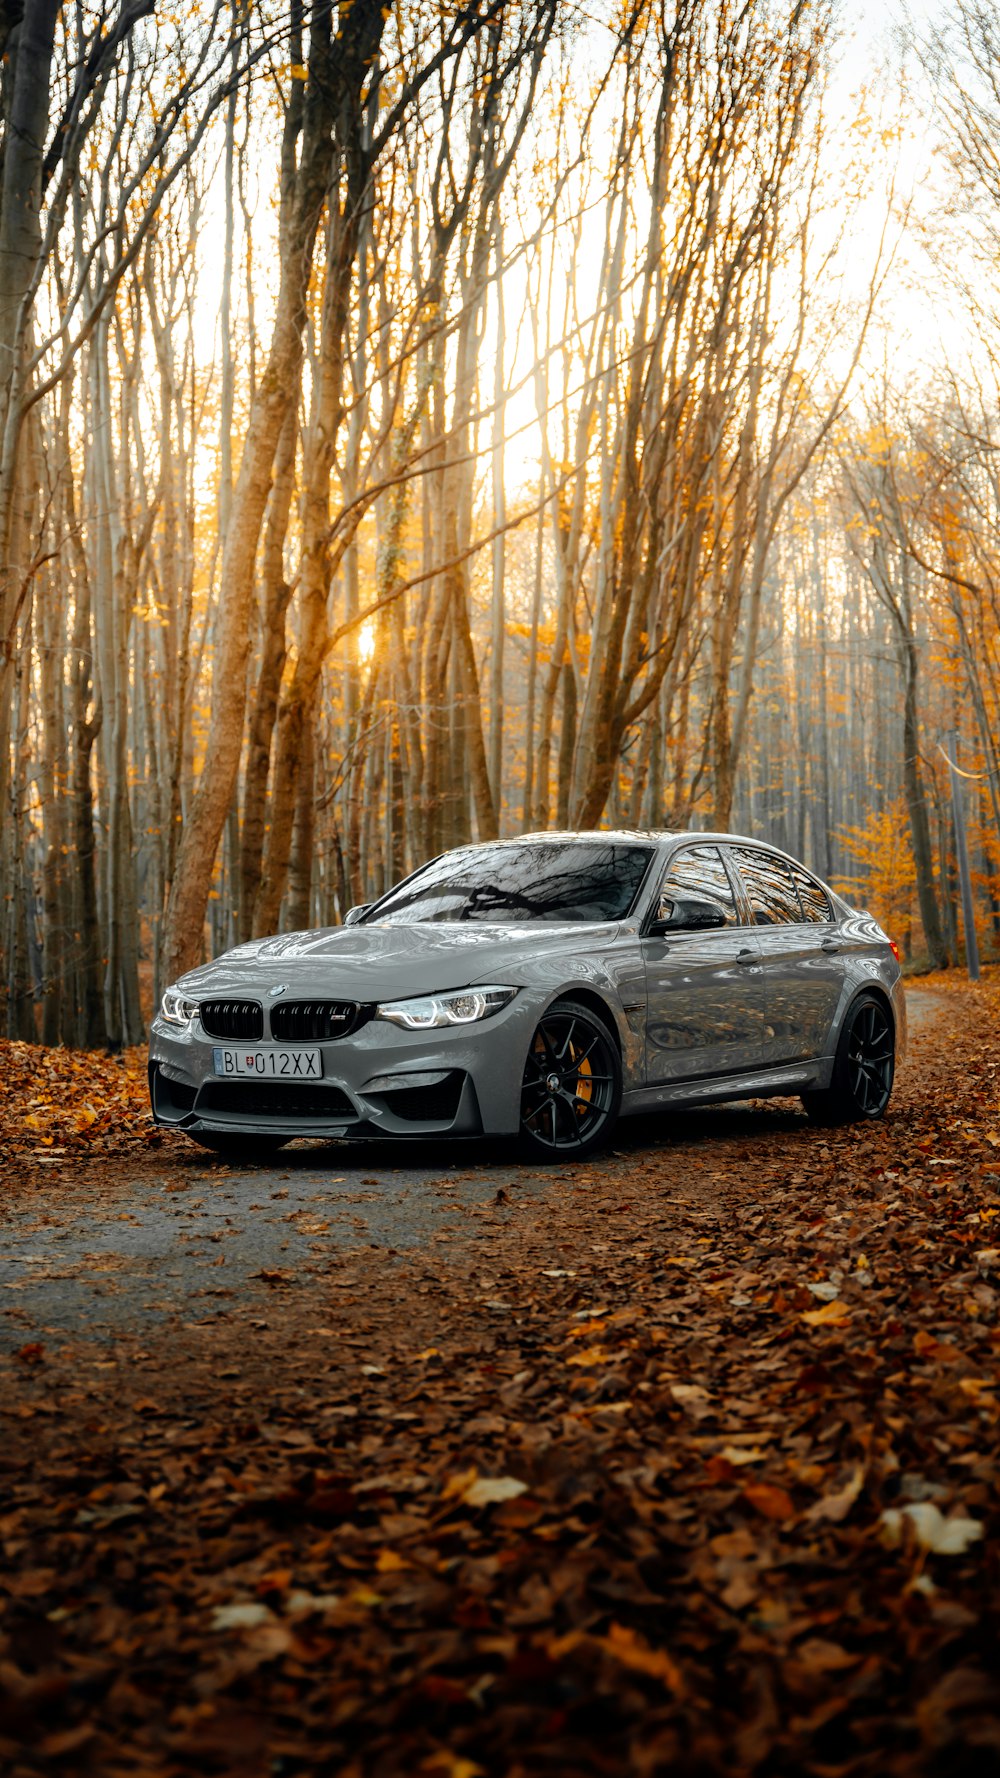 500+ Bmw M3 Pictures | Download Free Images & Stock Photos on Unsplash